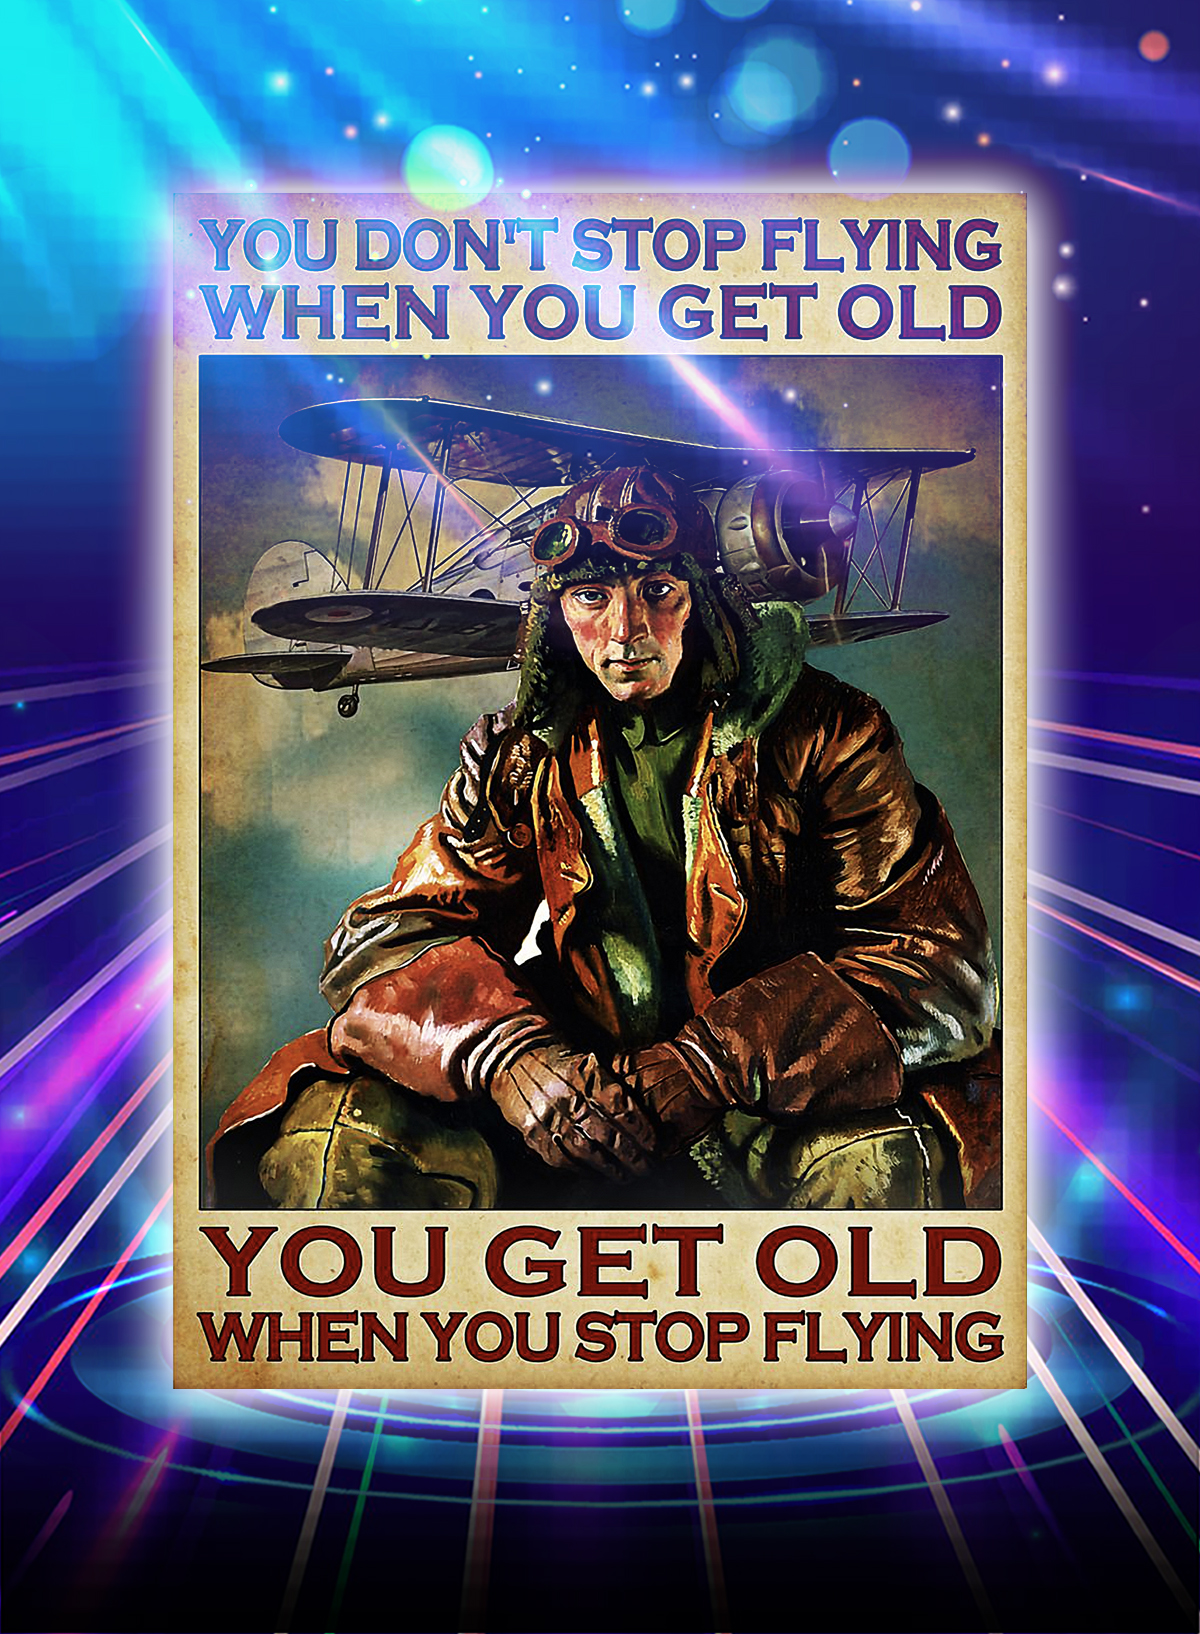 YOU DON'T STOP FLYING WHEN YOU GET OLD PILOT POSTER